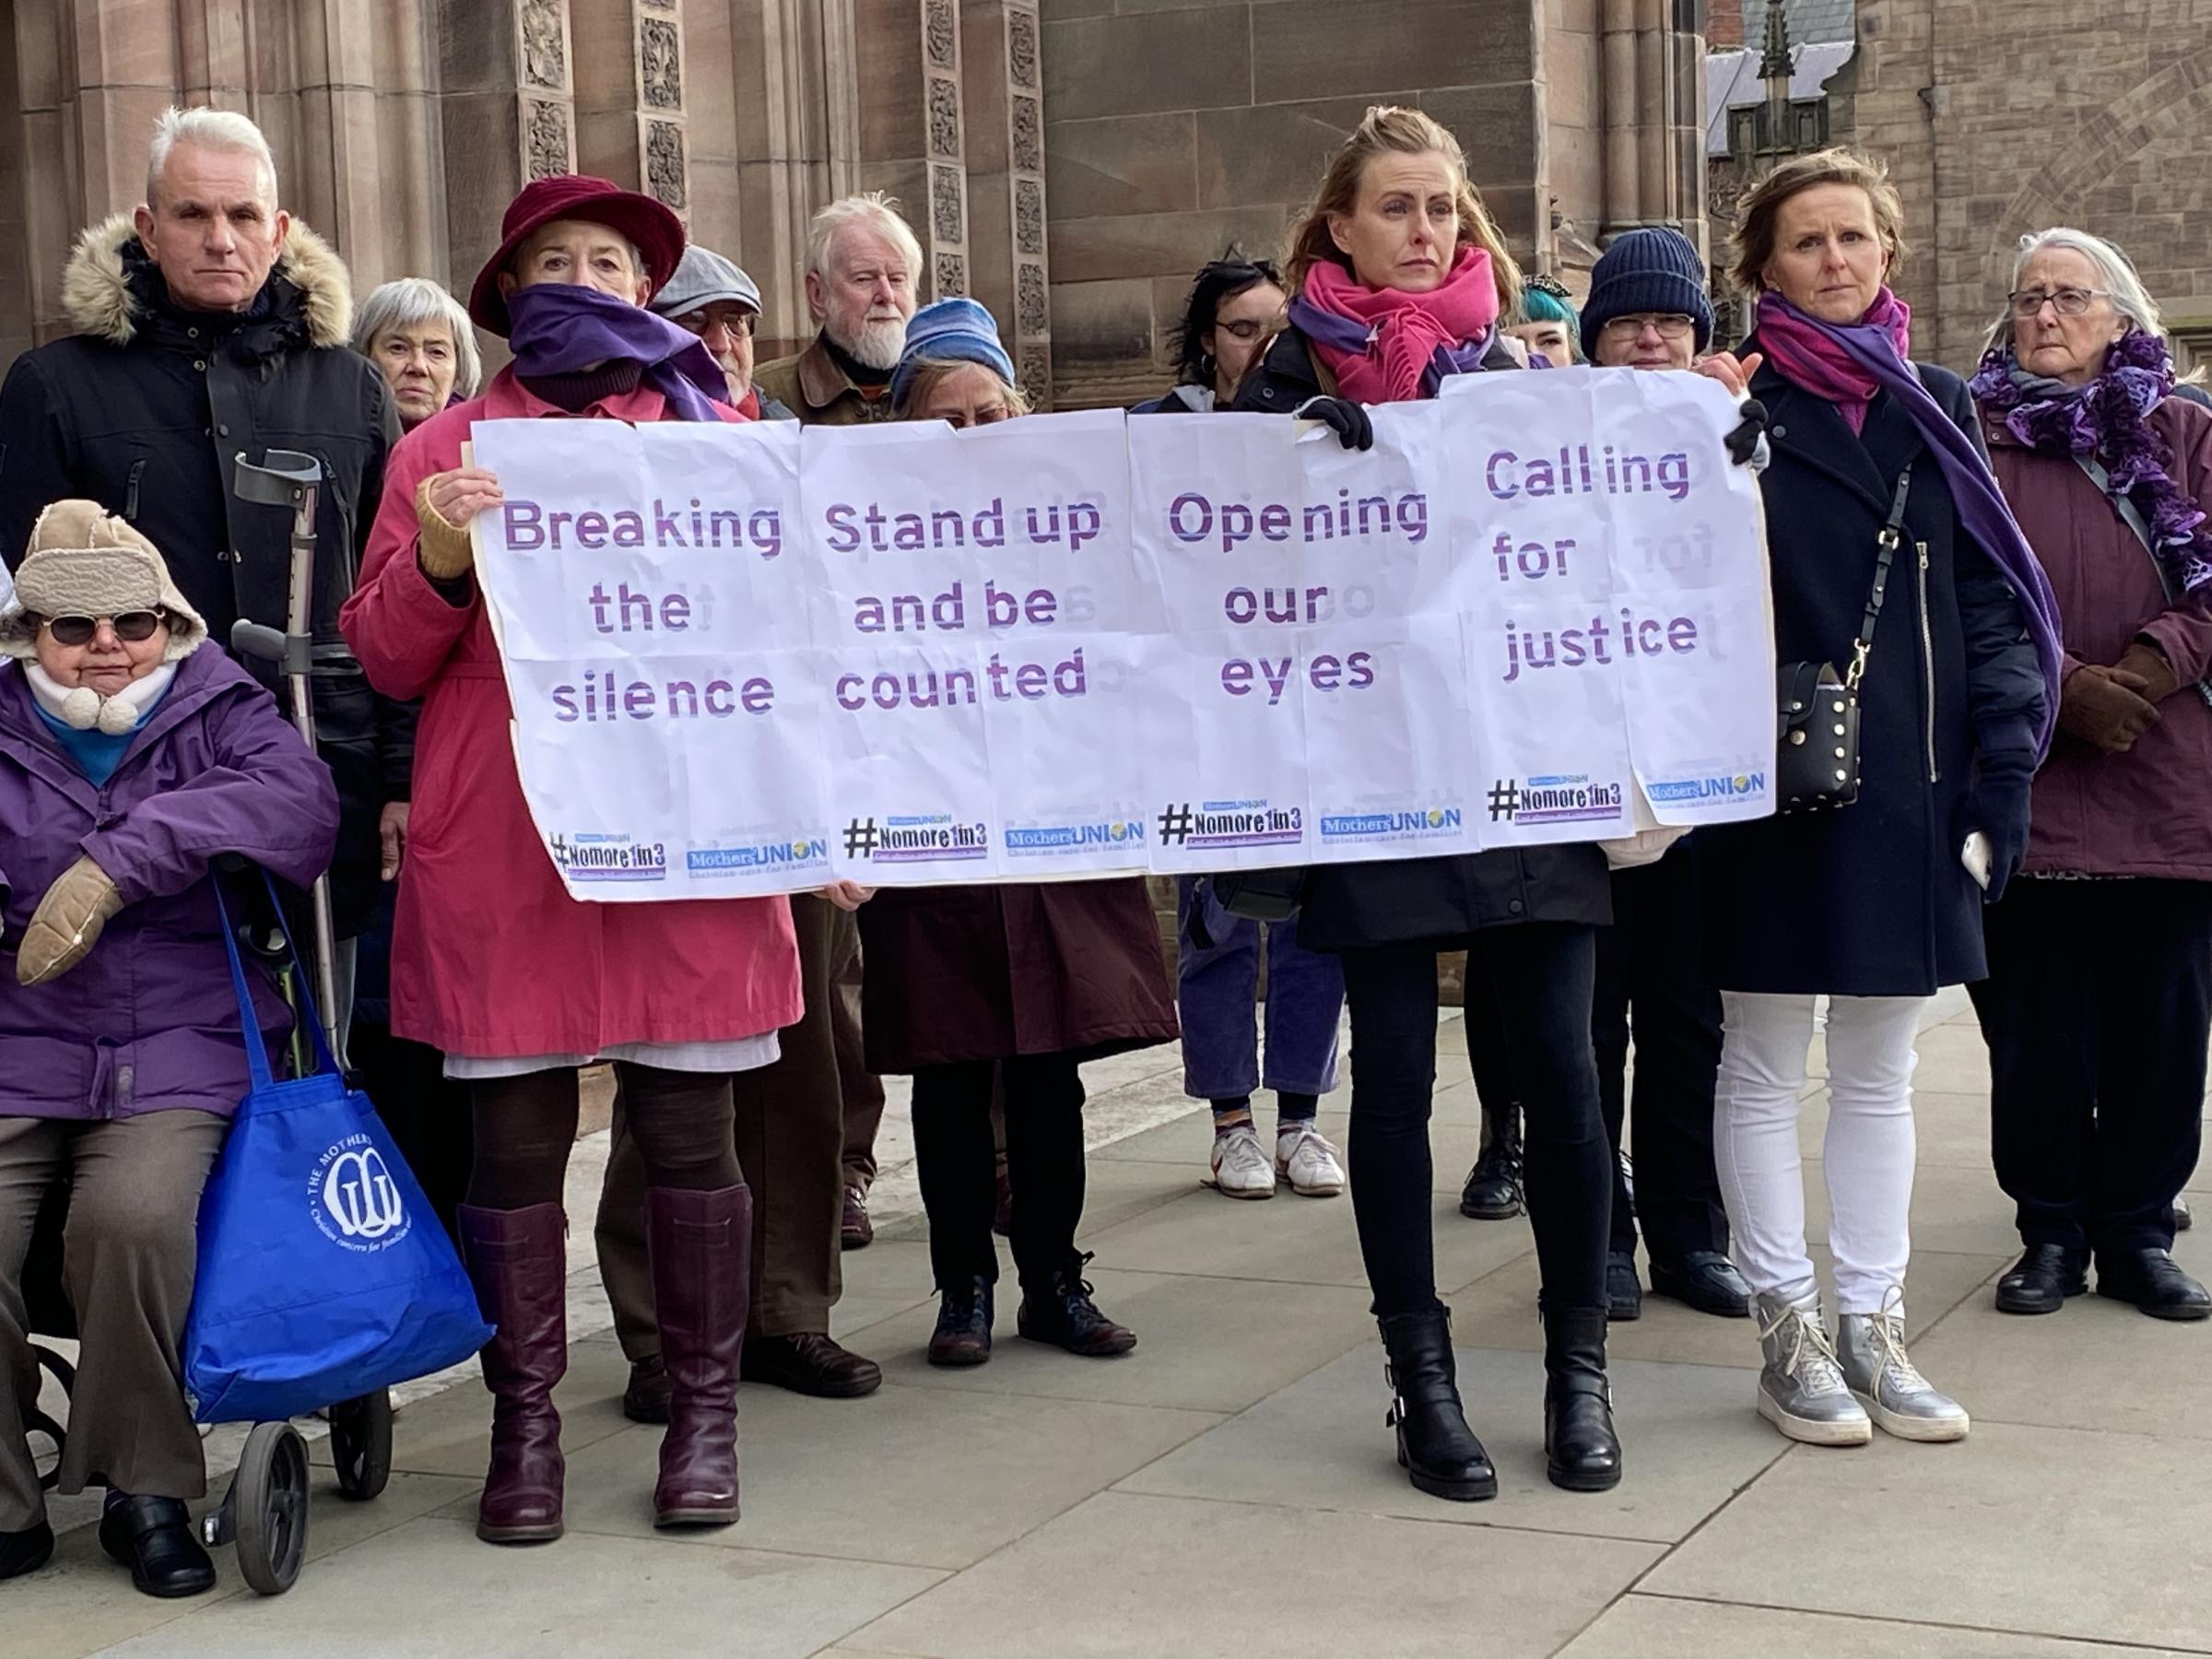 Three-minute silence outside Hereford Cathedral for Mothers Union #nomore1in3 campaign